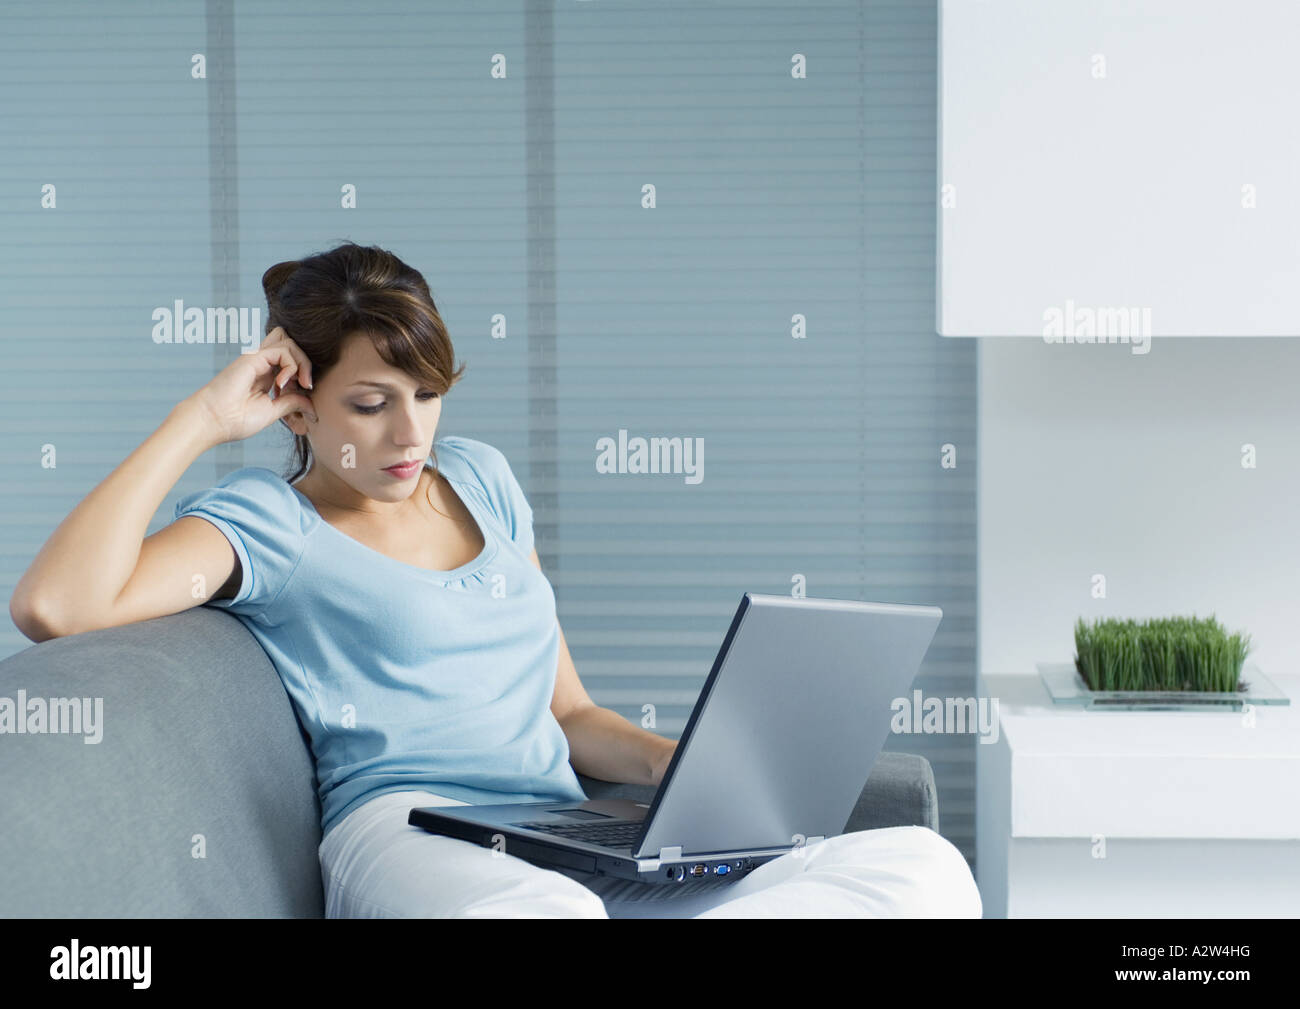 Young woman sitting on sofa, using laptop Stock Photo